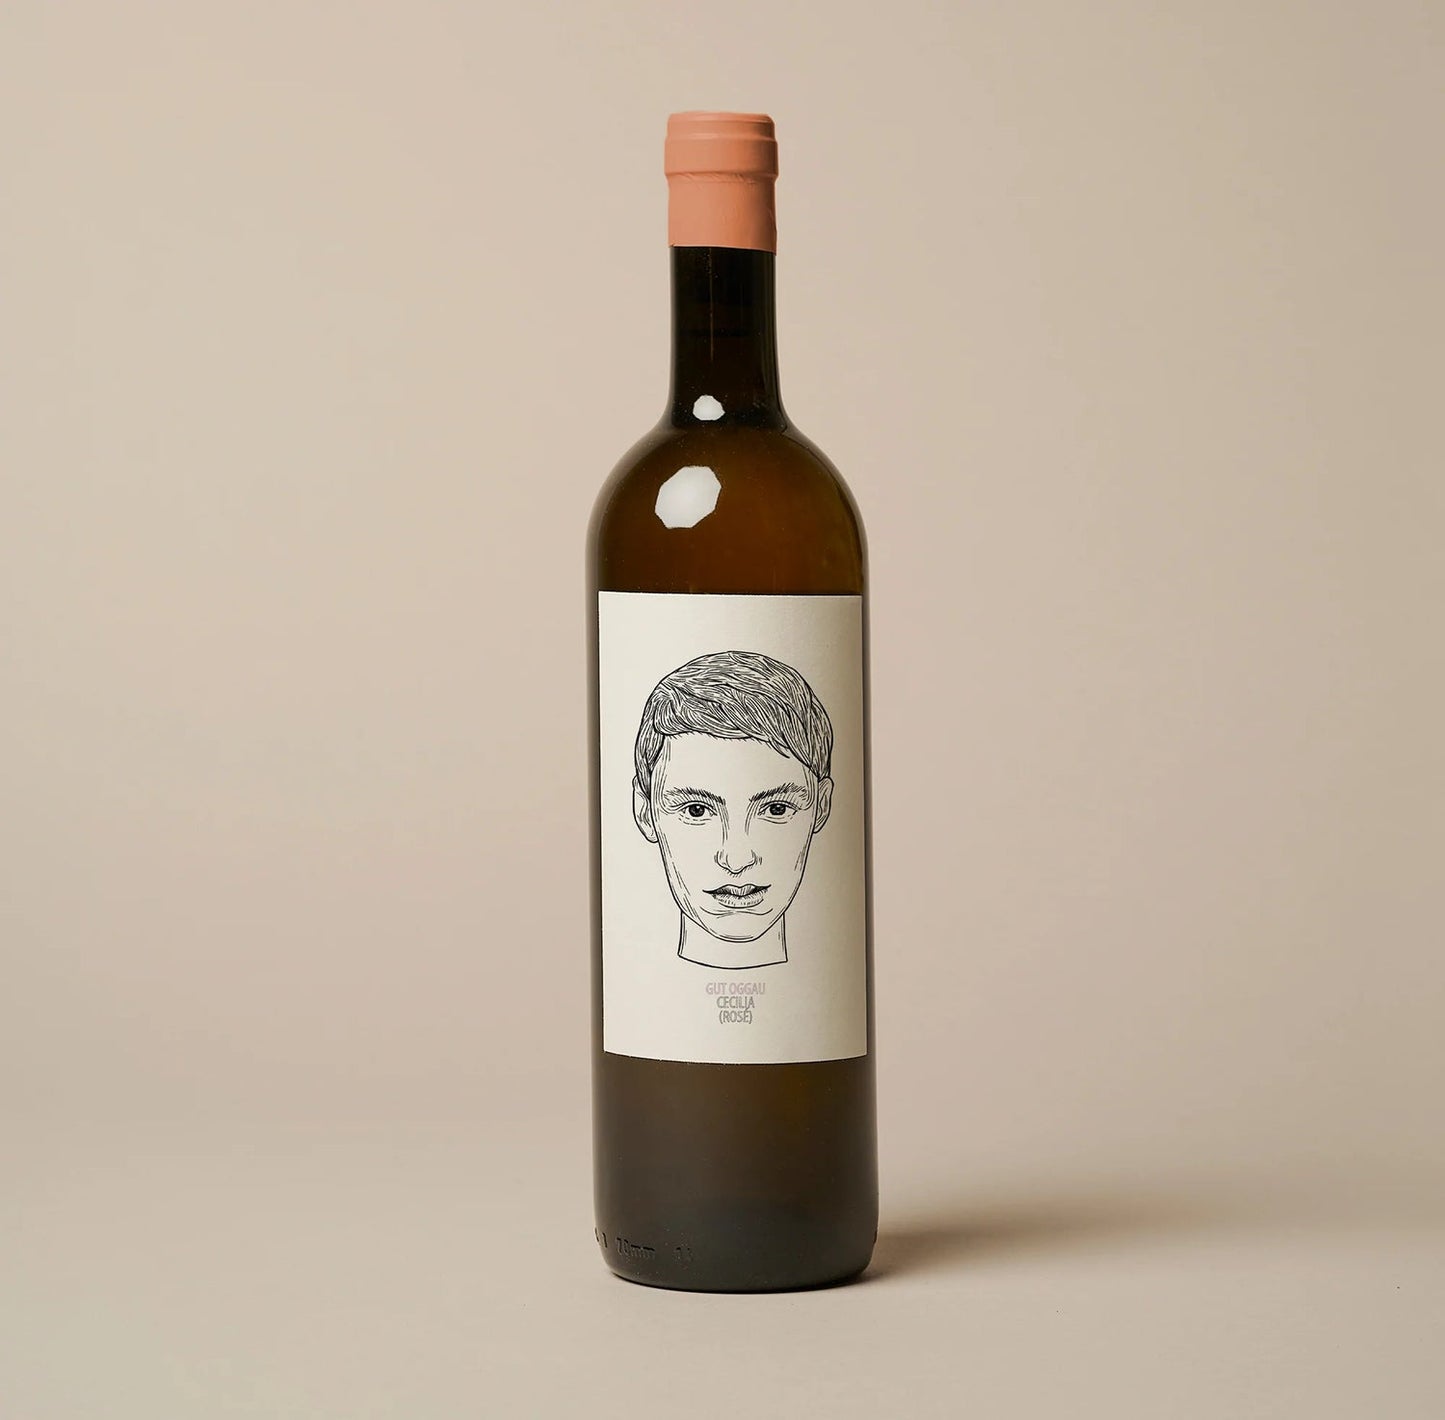 wine bottle with a face on label